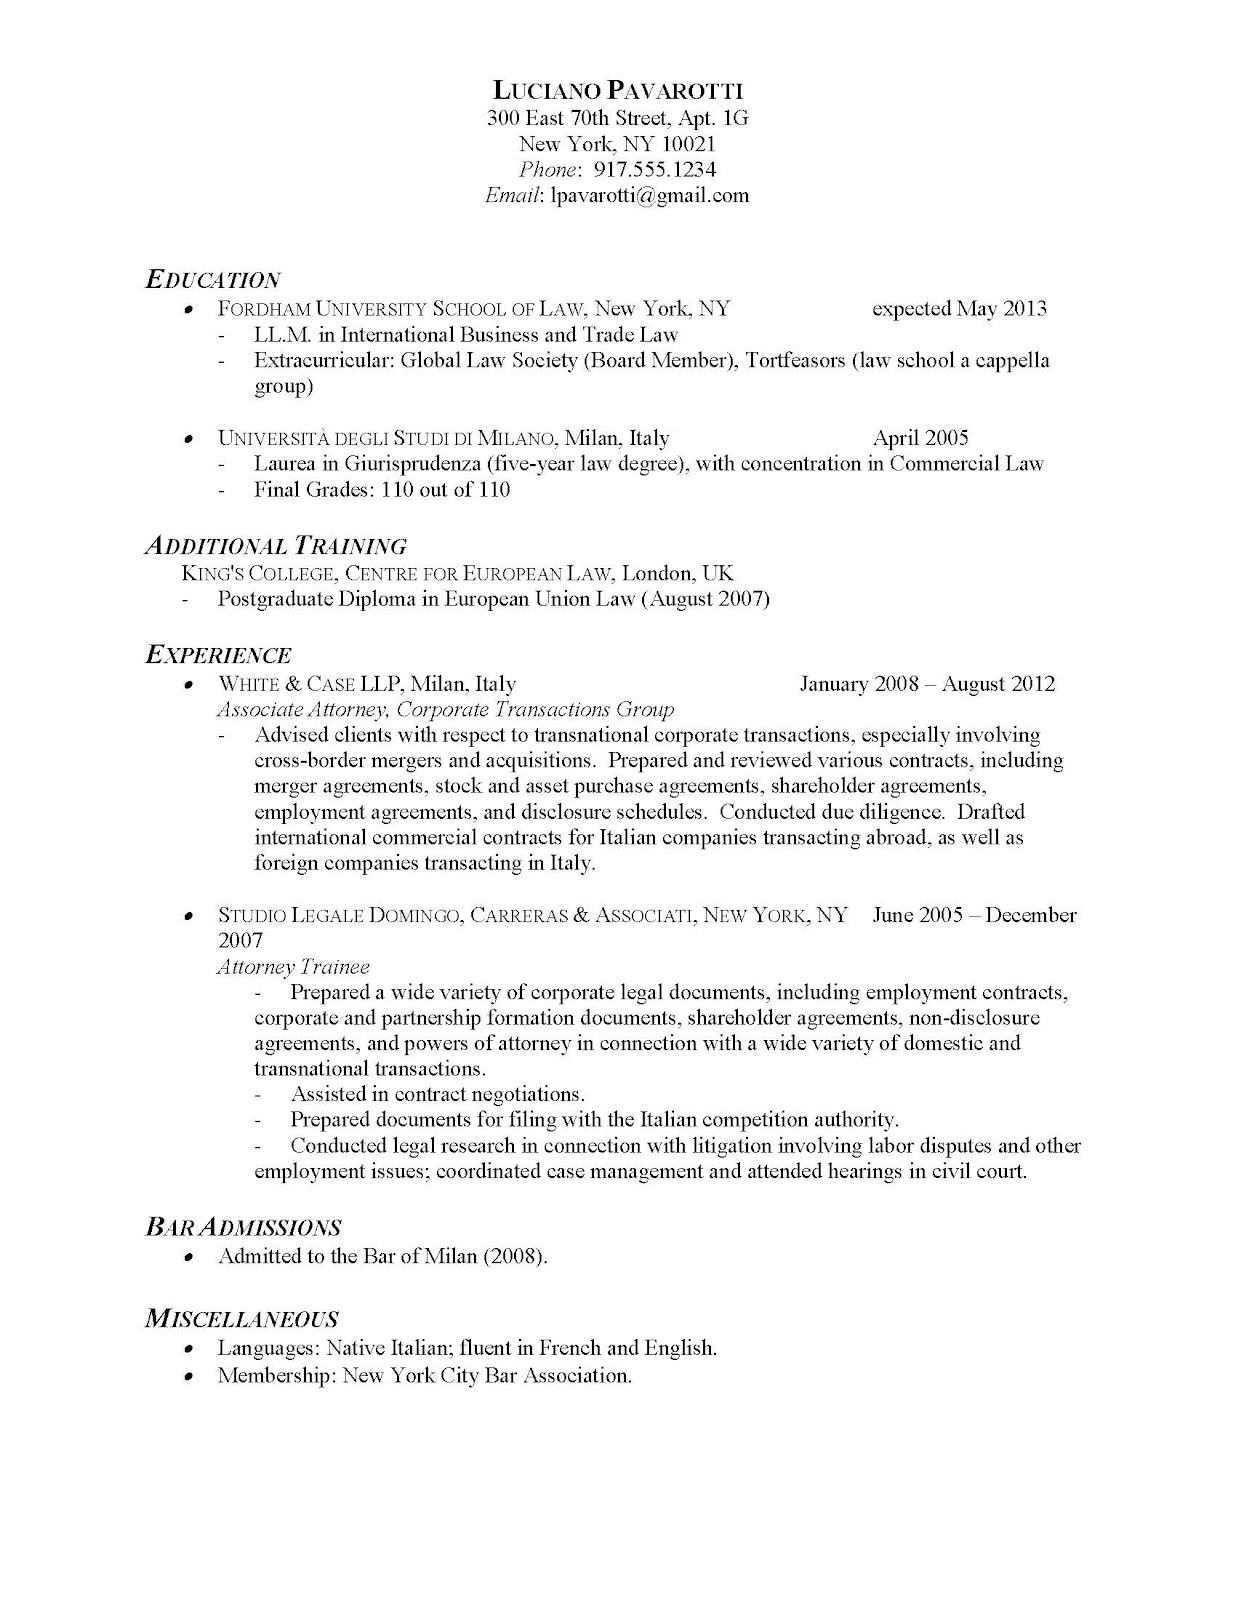 Email draft for resume